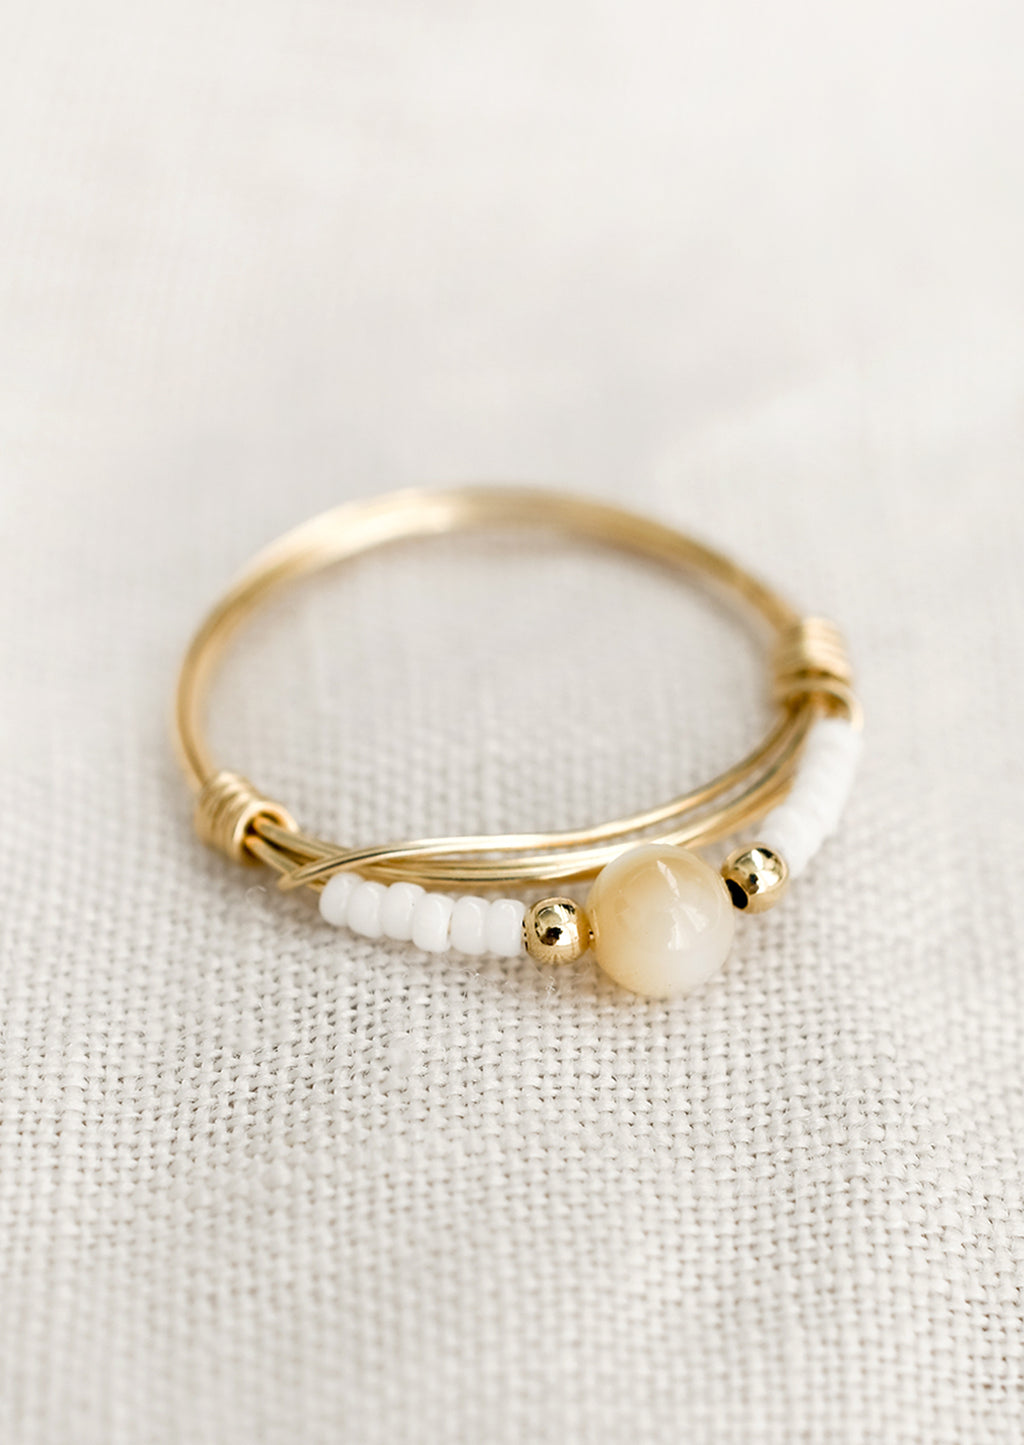 Size 5 / White: A gold wire ring with white and tan beads.